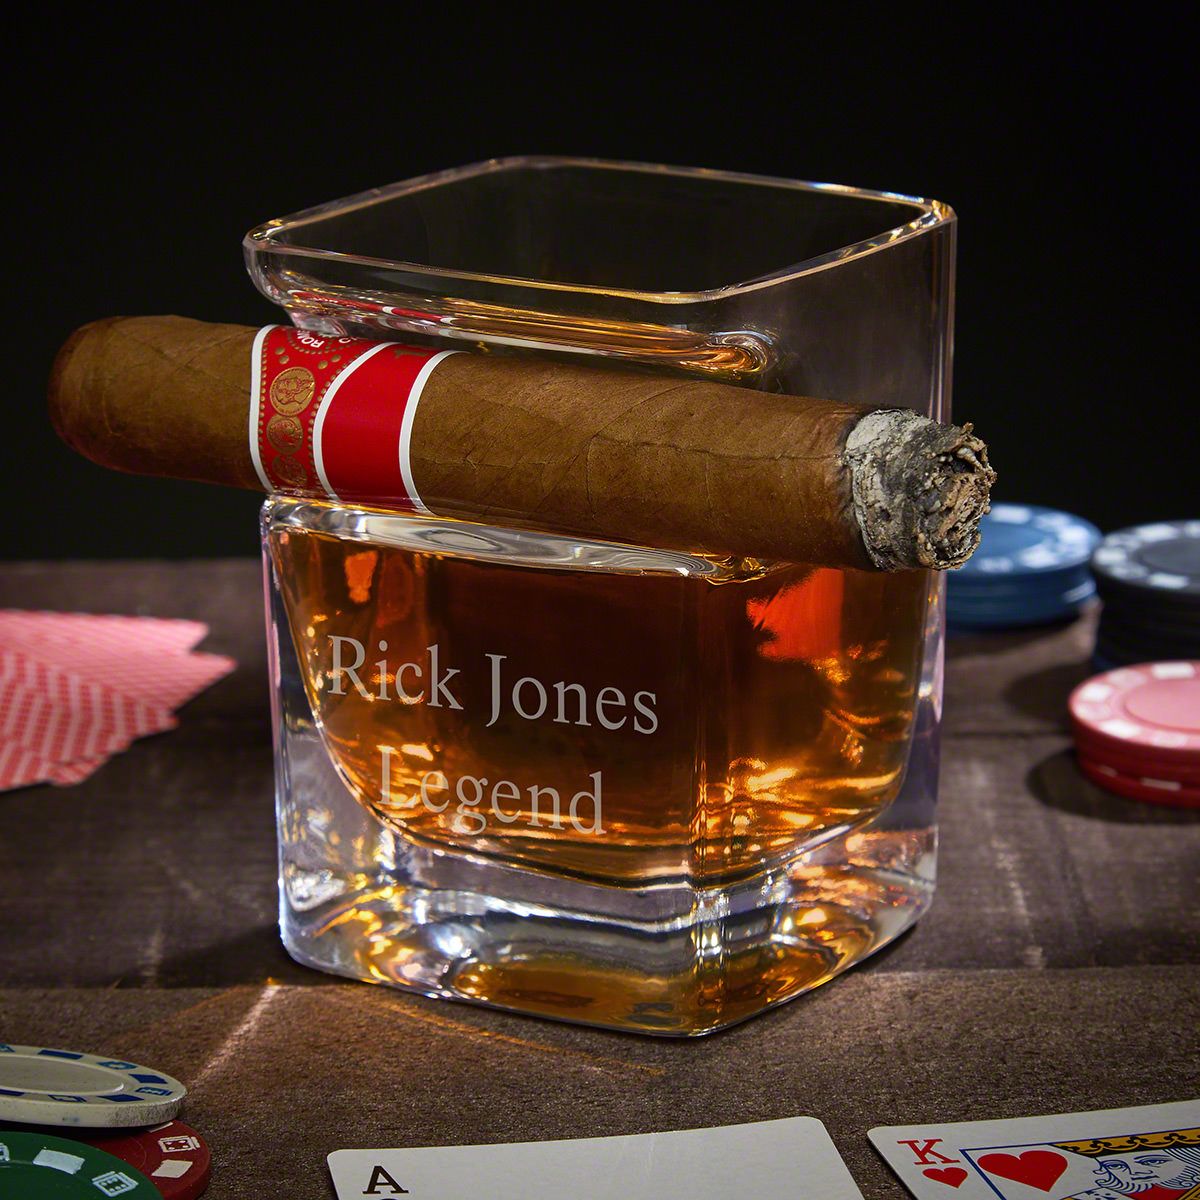 https://images.homewetbar.com/media/catalog/product/7/3/7388-personalized-cigar-glass.jpg?store=default&image-type=image